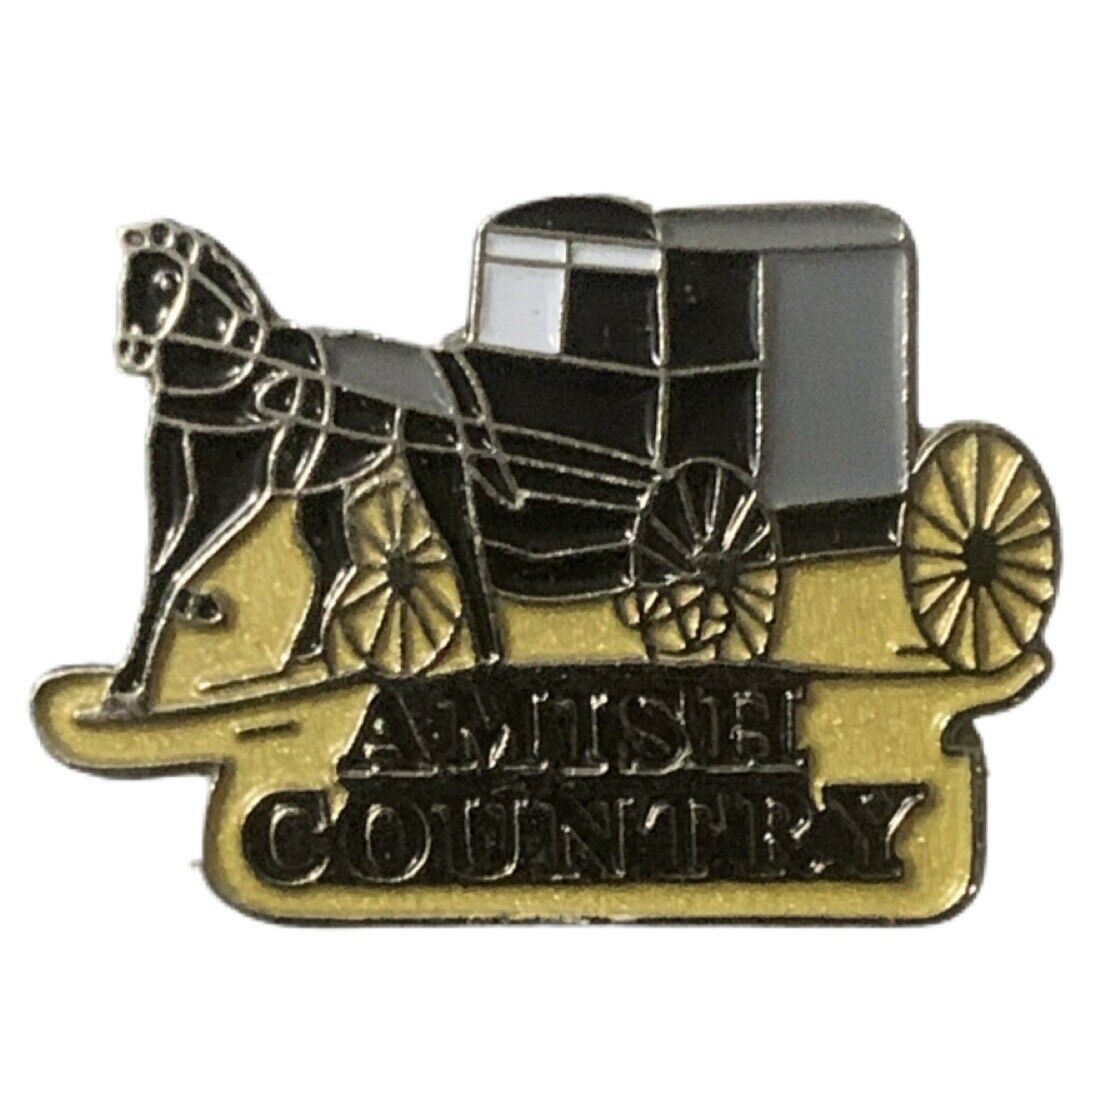 Vintage Amish Country Pennsylvania Horse and Buggy Travel Souvenir Pin